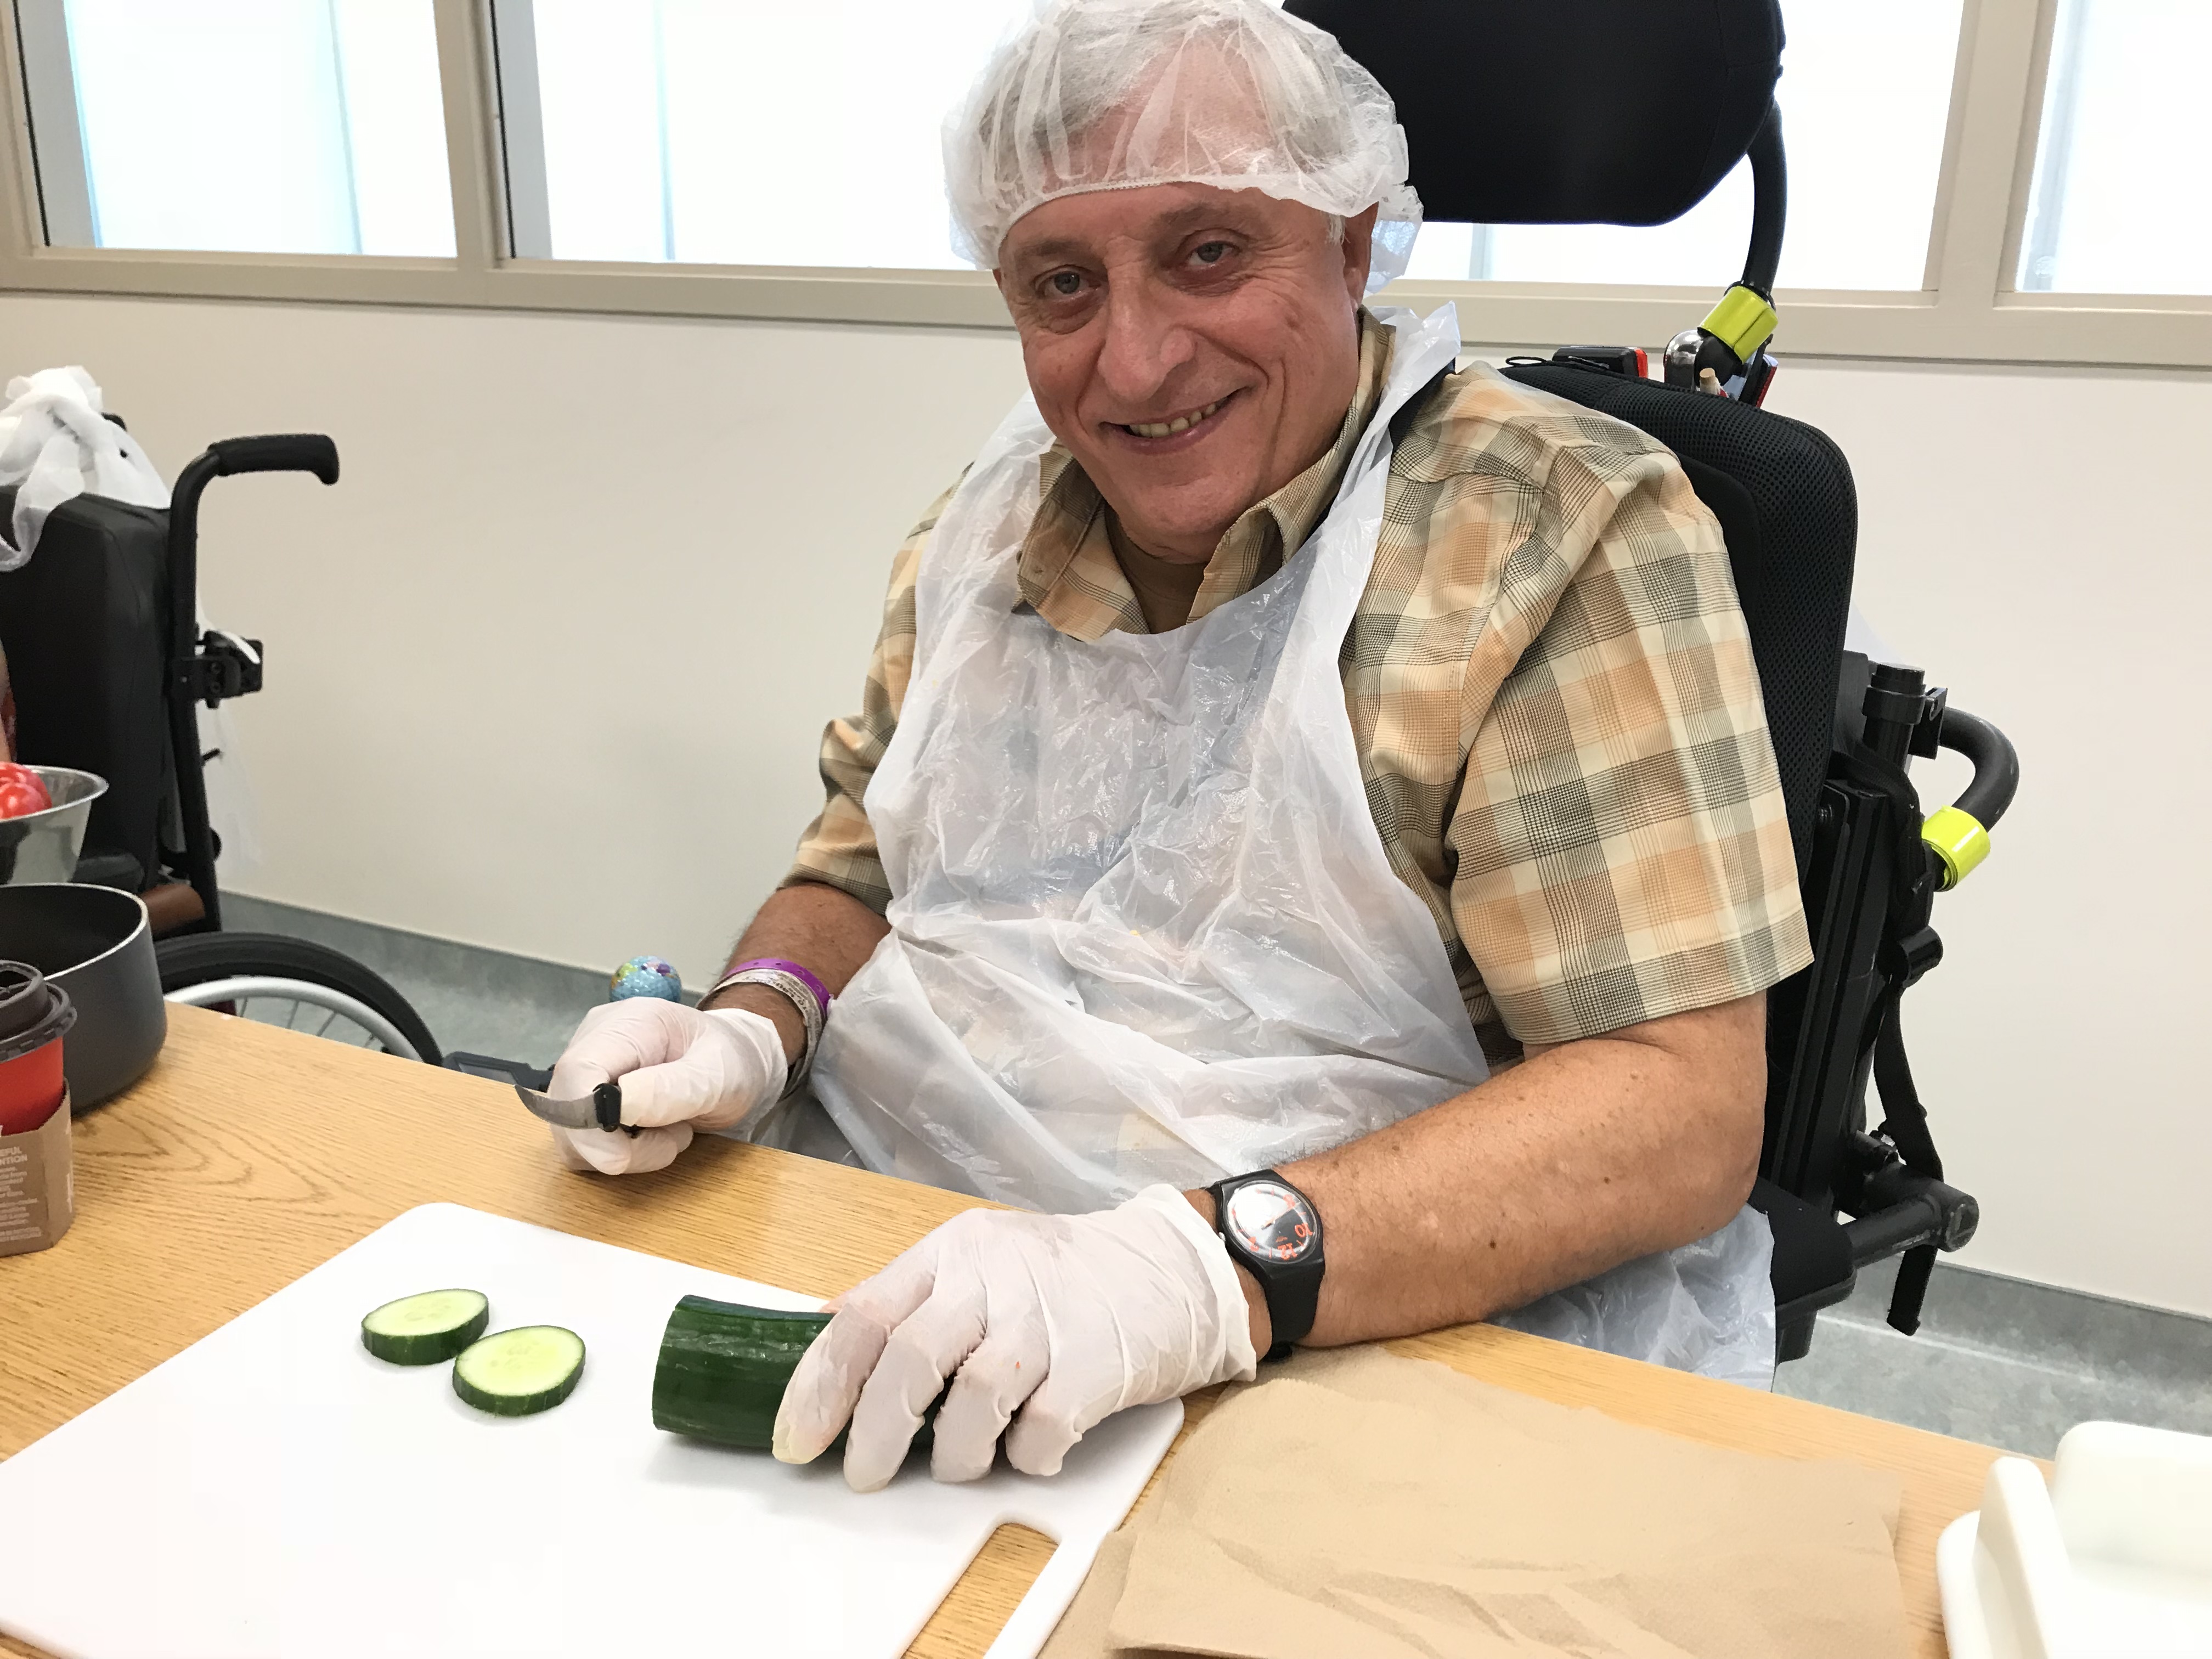 A man wearing an apron, hair net and gloves chops a cucumber at a table. 